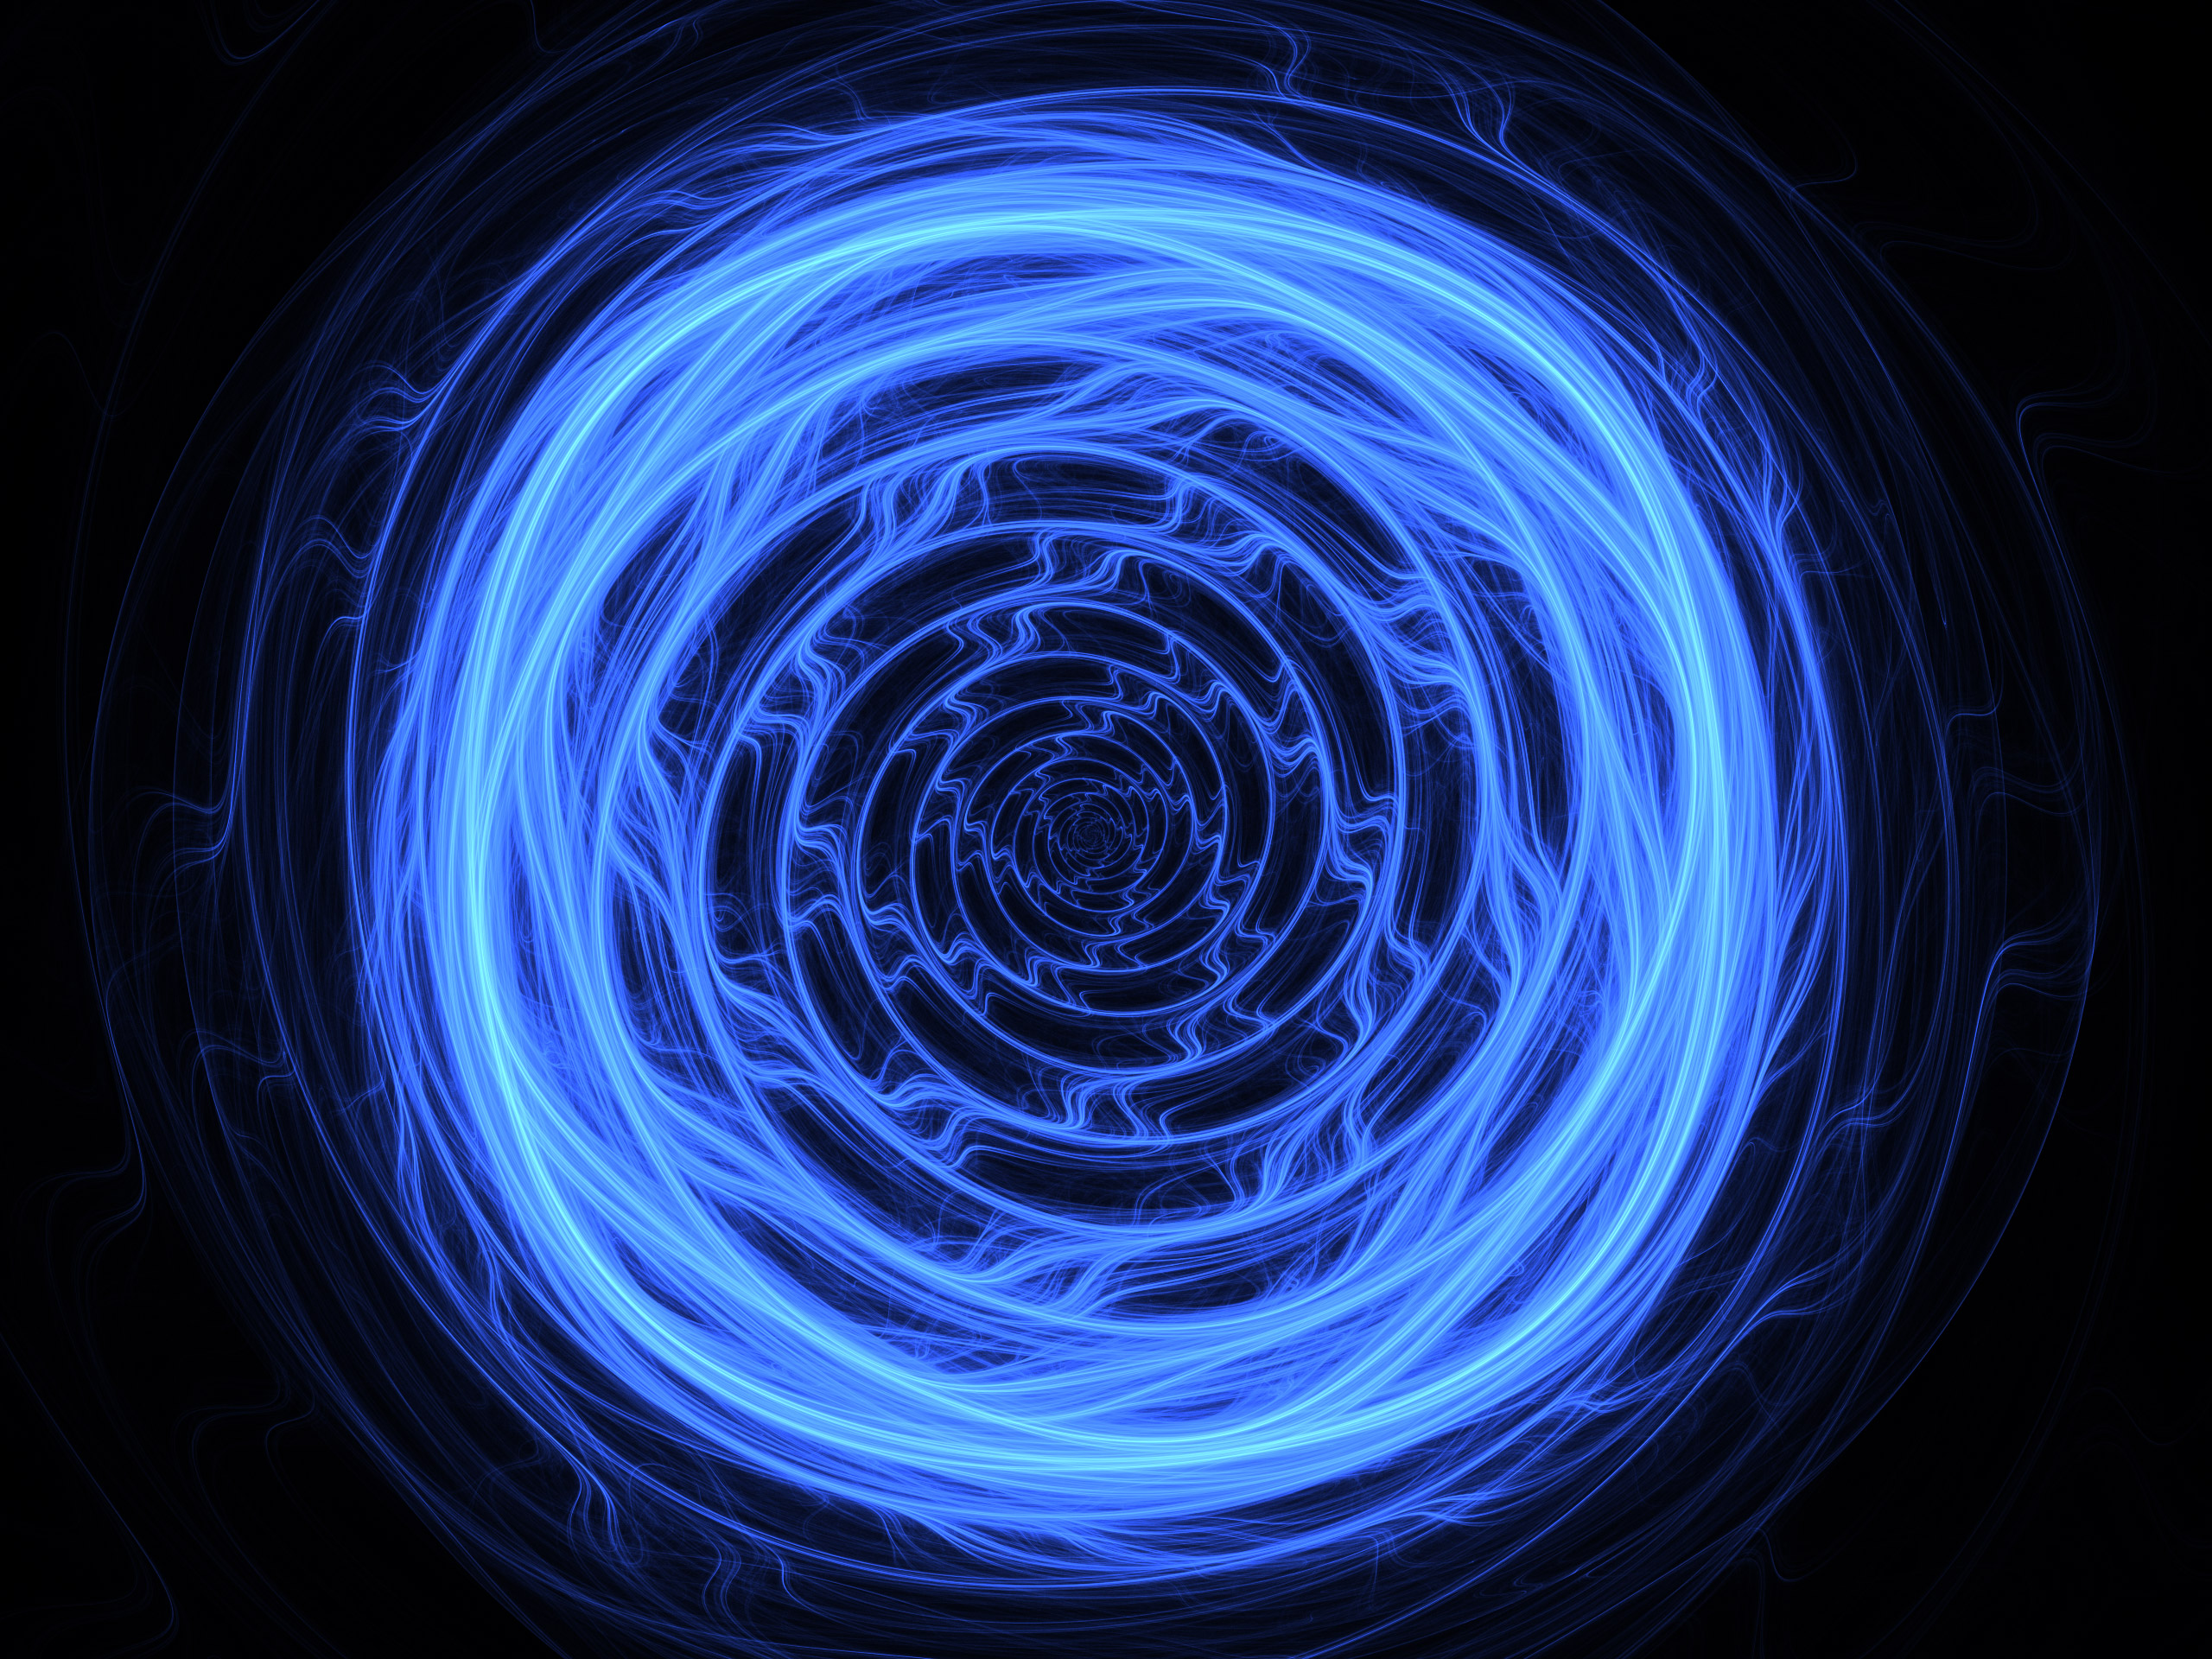 Circle Swirl Shapes Abstract Blue Wallpaper and Free